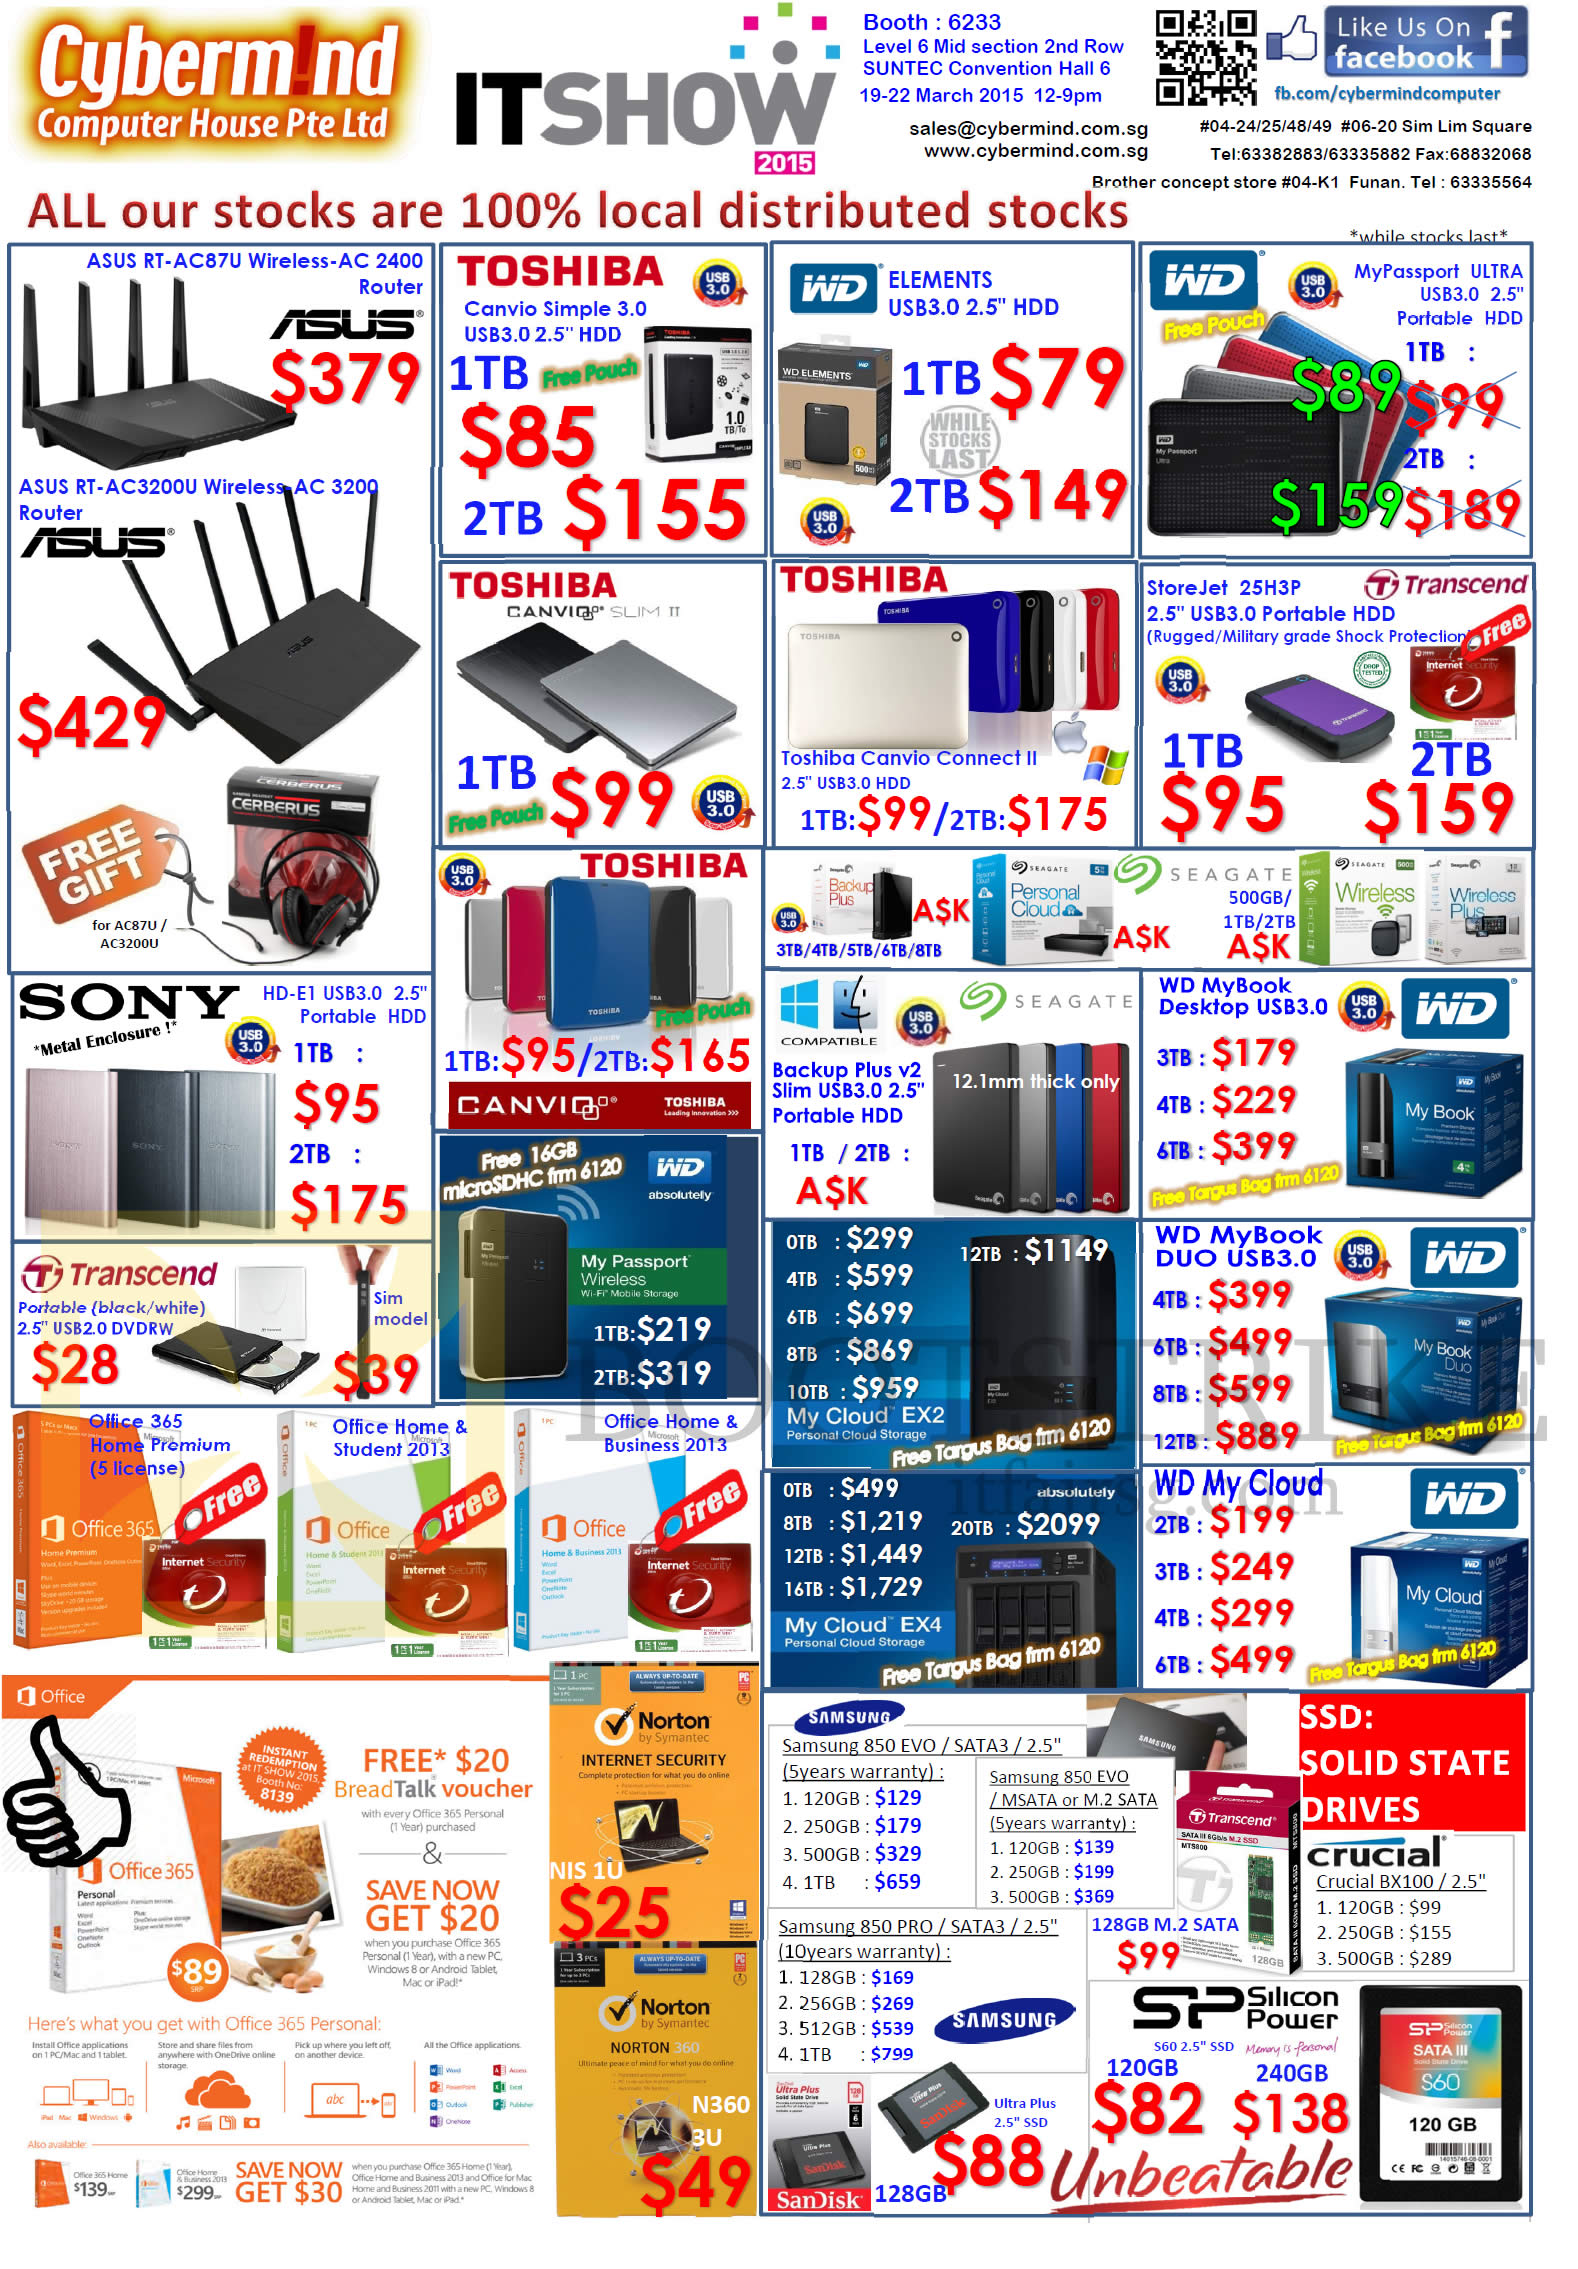 IT SHOW 2015 price list image brochure of Cybermind Routers, Hard Disk Drives, Microsoft Office, Norton Internet Security, SSD, Toshiba Transcend Sony WD Western Digital Canvio, 850 Pro Evo, Crucial